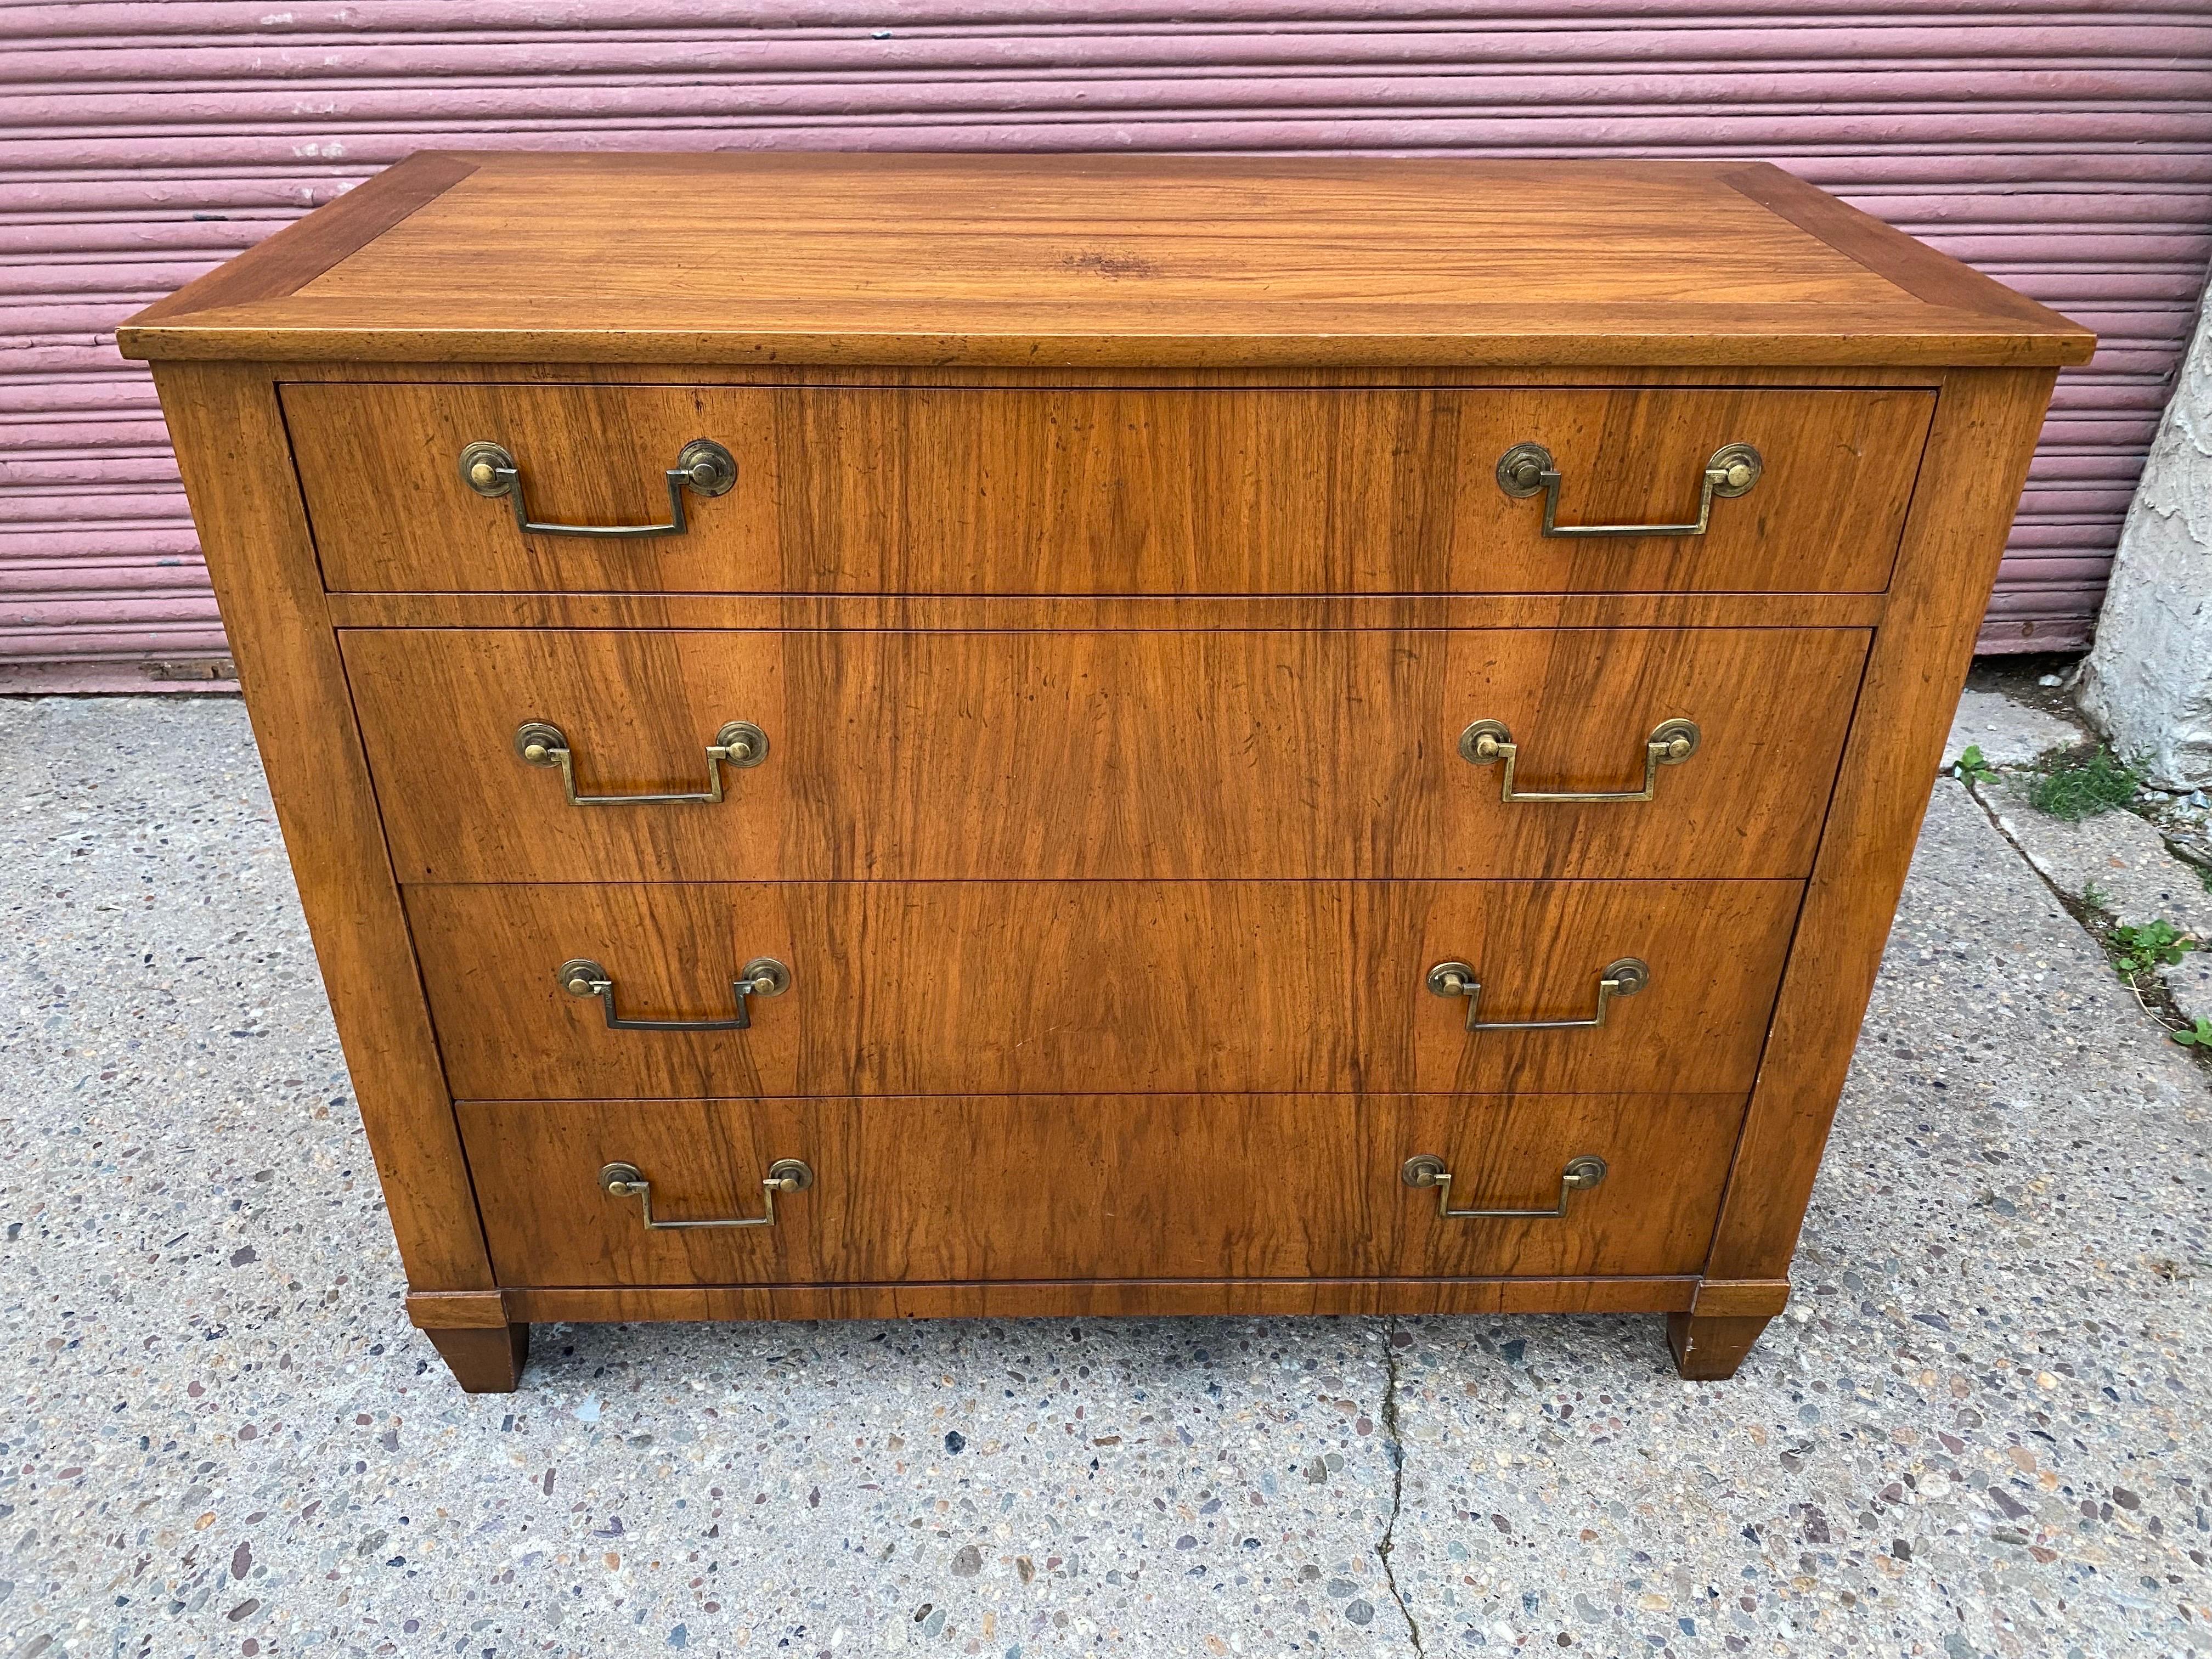 Baker 4 drawer dresser. Classic Style, extremely well made! All original, one area on top as seen in photo that shows losses. Overall very clean and presents very well!.